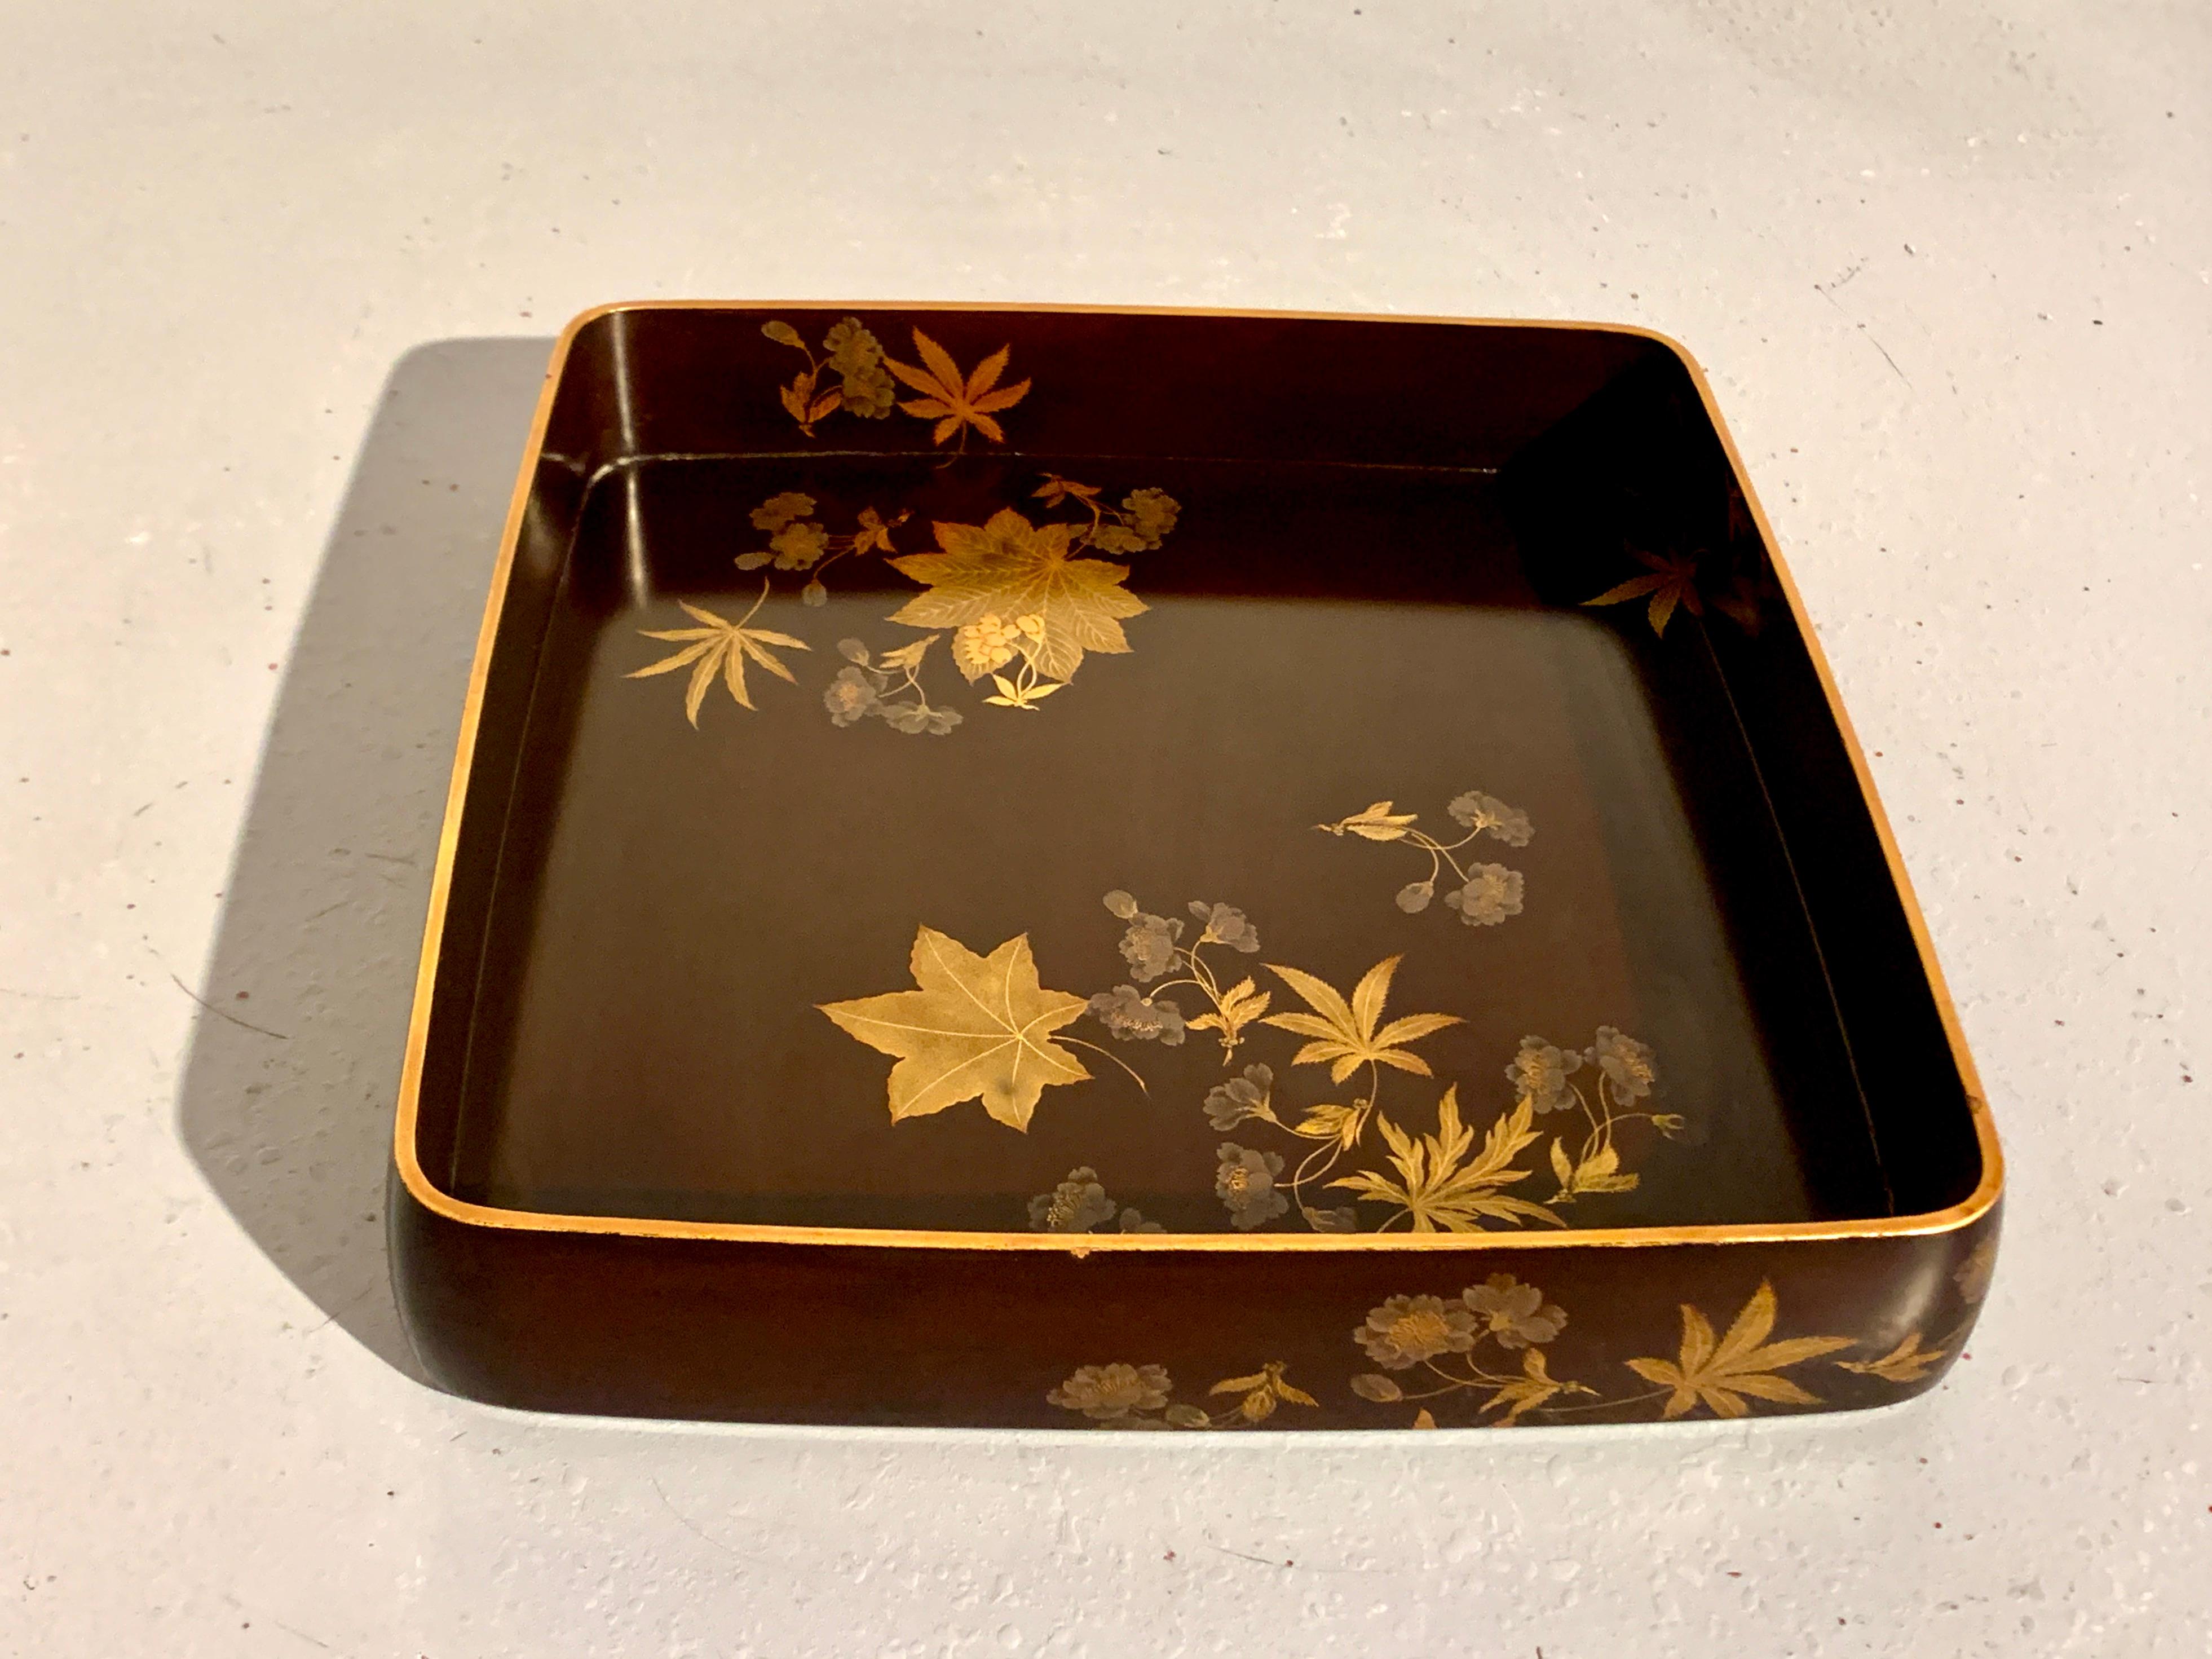 Taisho Japanese Lacquer Tray by Zohiko, Meiji Period, Early 20th Century, Japan